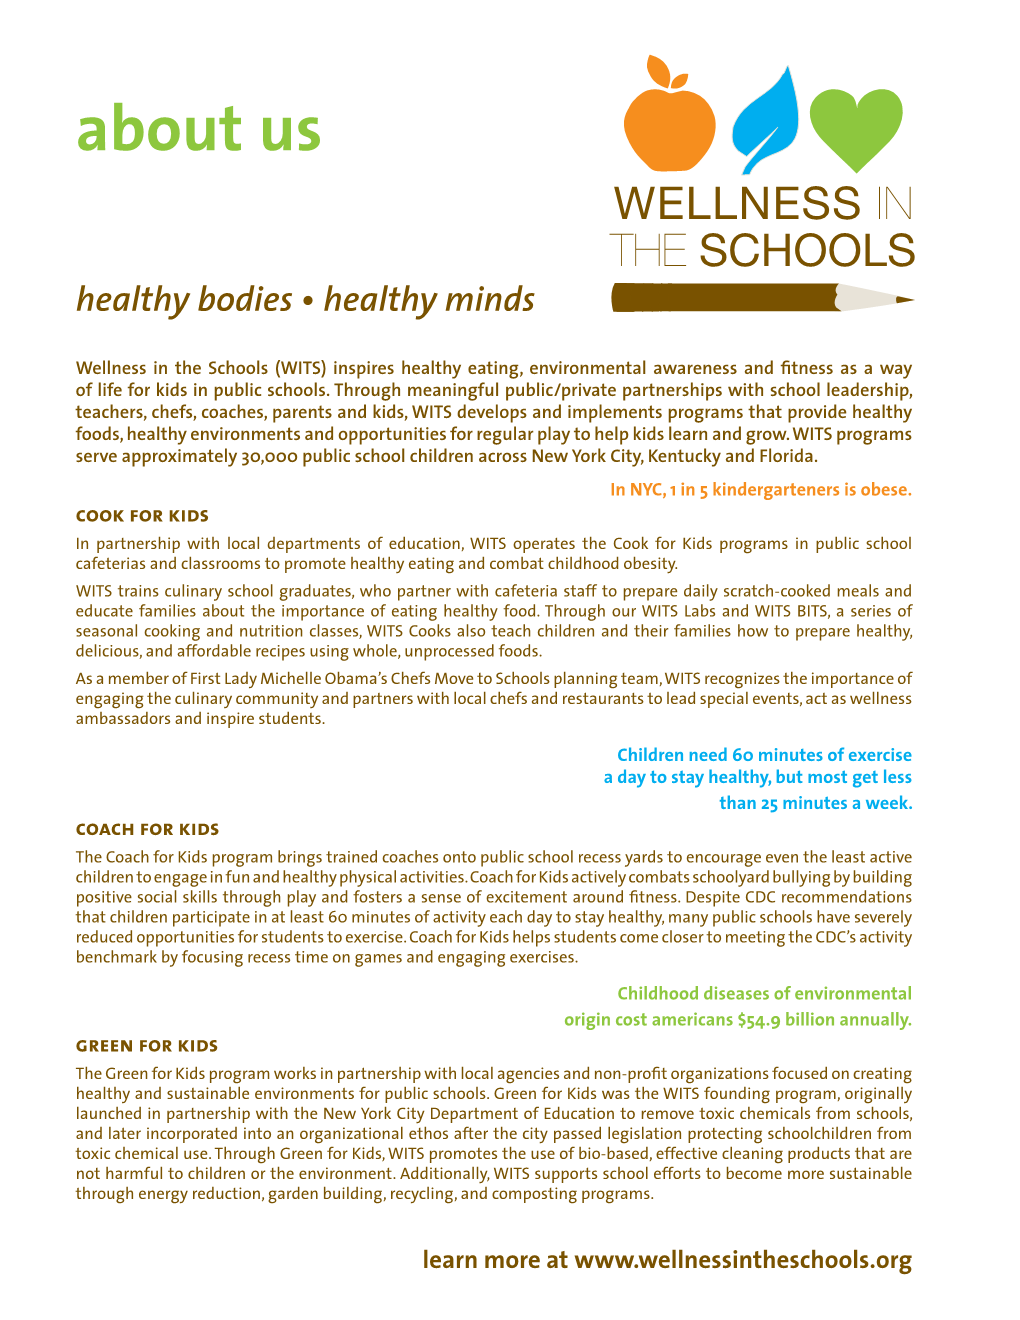 About Us WELLNESS in the SCHOOLS Healthy Bodies • Healthy Minds